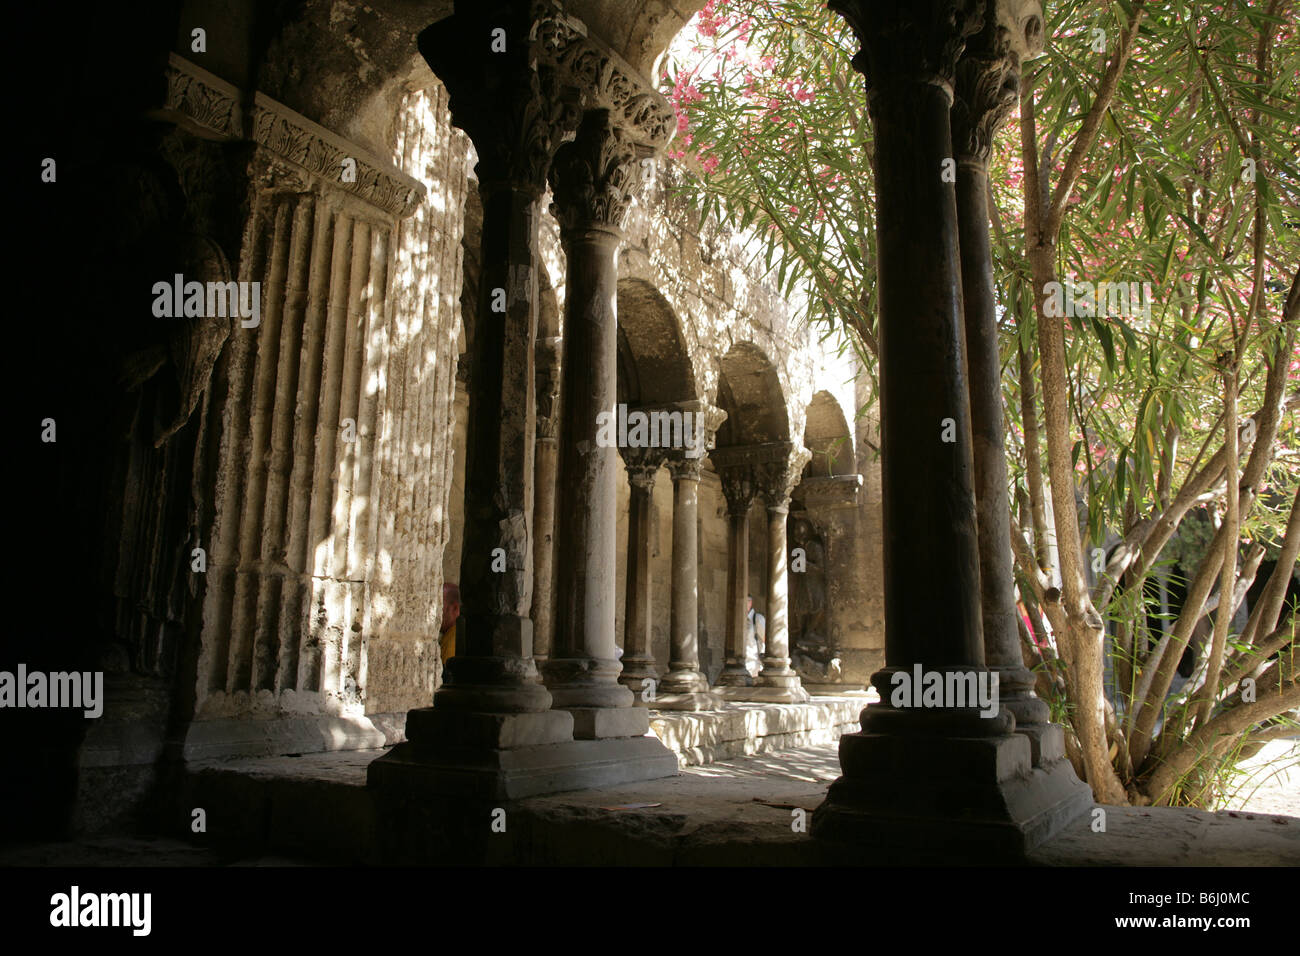 Cloister columns and sunlit courtyard at church of St Trophime, Arles, Bouches-du-Rhone, France Stock Photo